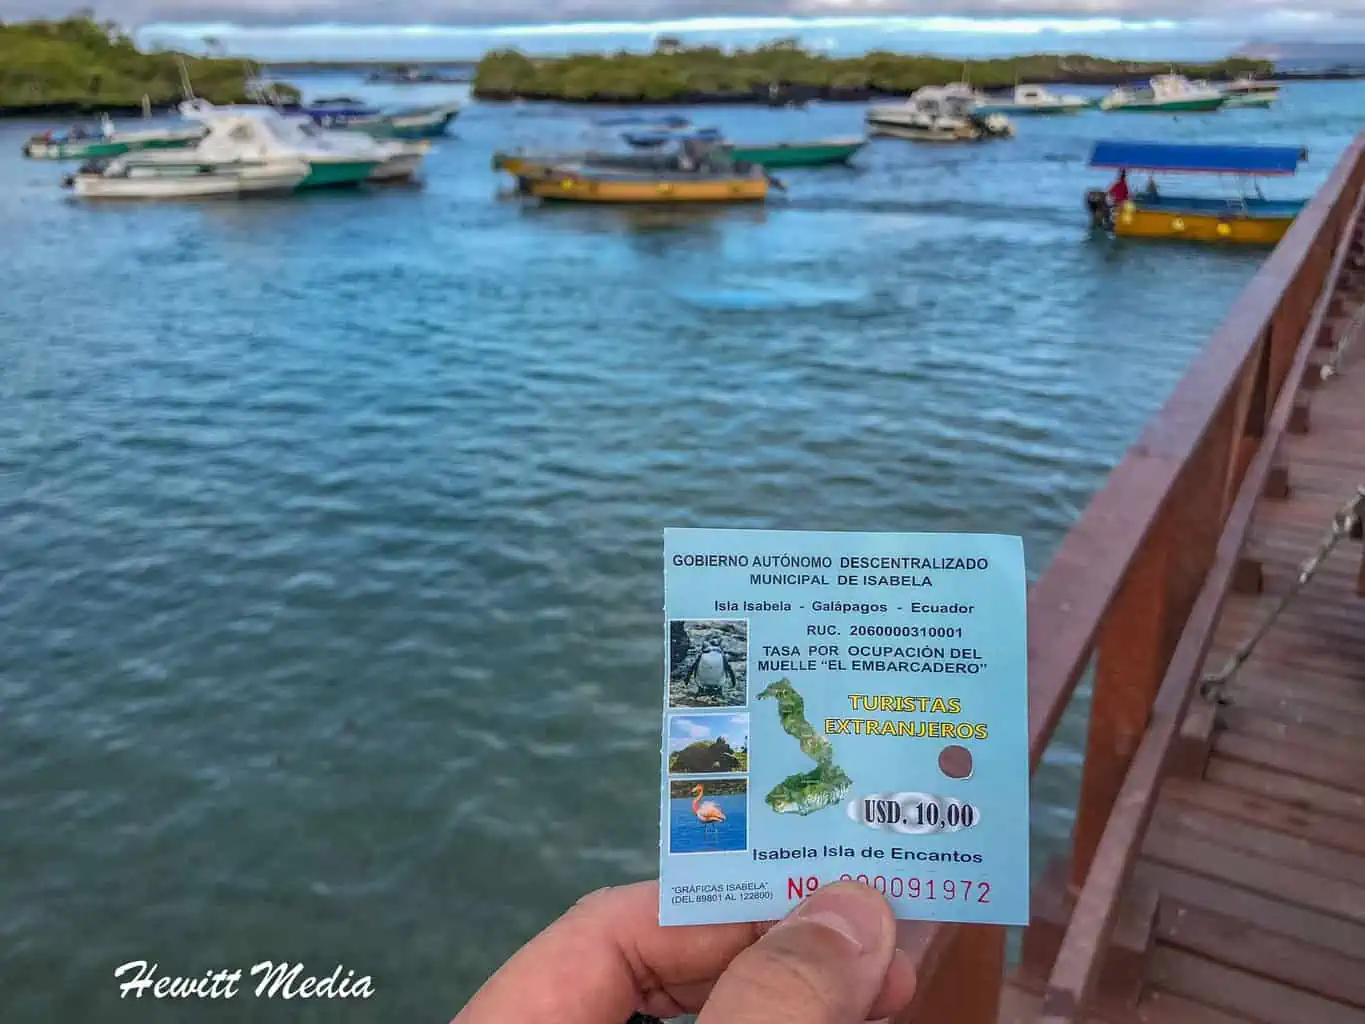 Pay $10 tax upon arriving on Isabela Island